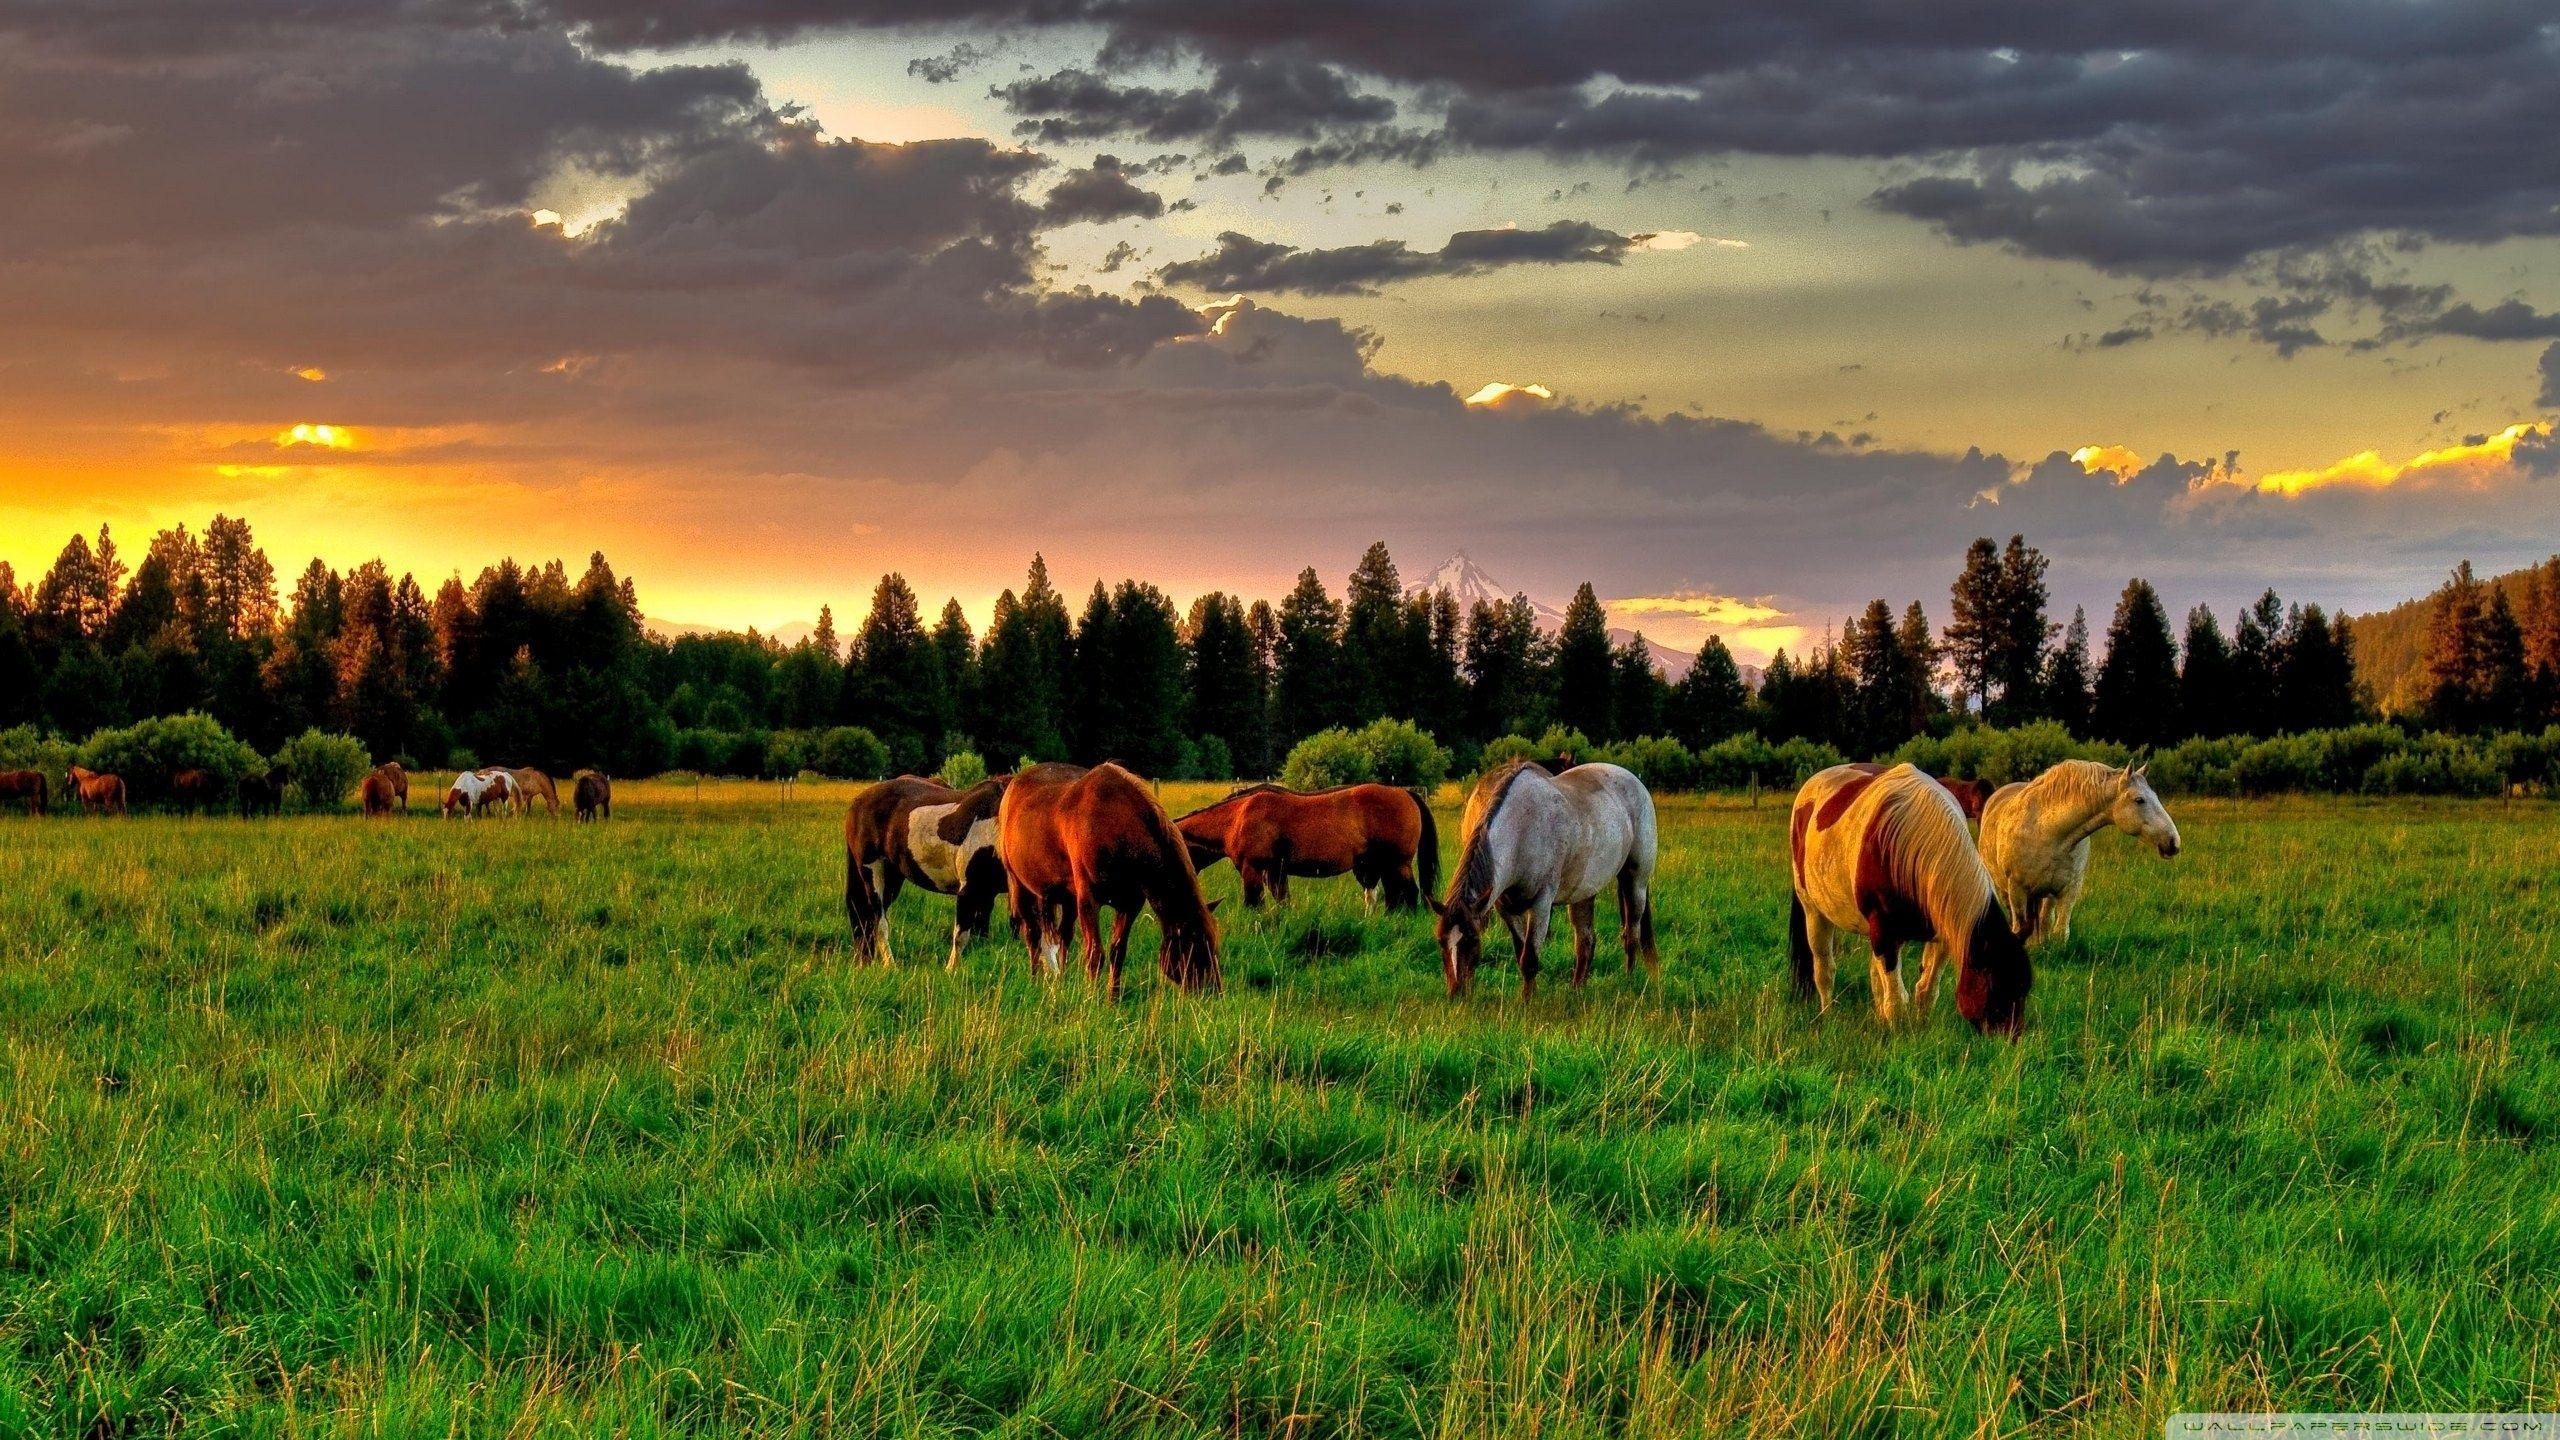 Download Your Favorite Westgate River Ranch Wallpaper HERE